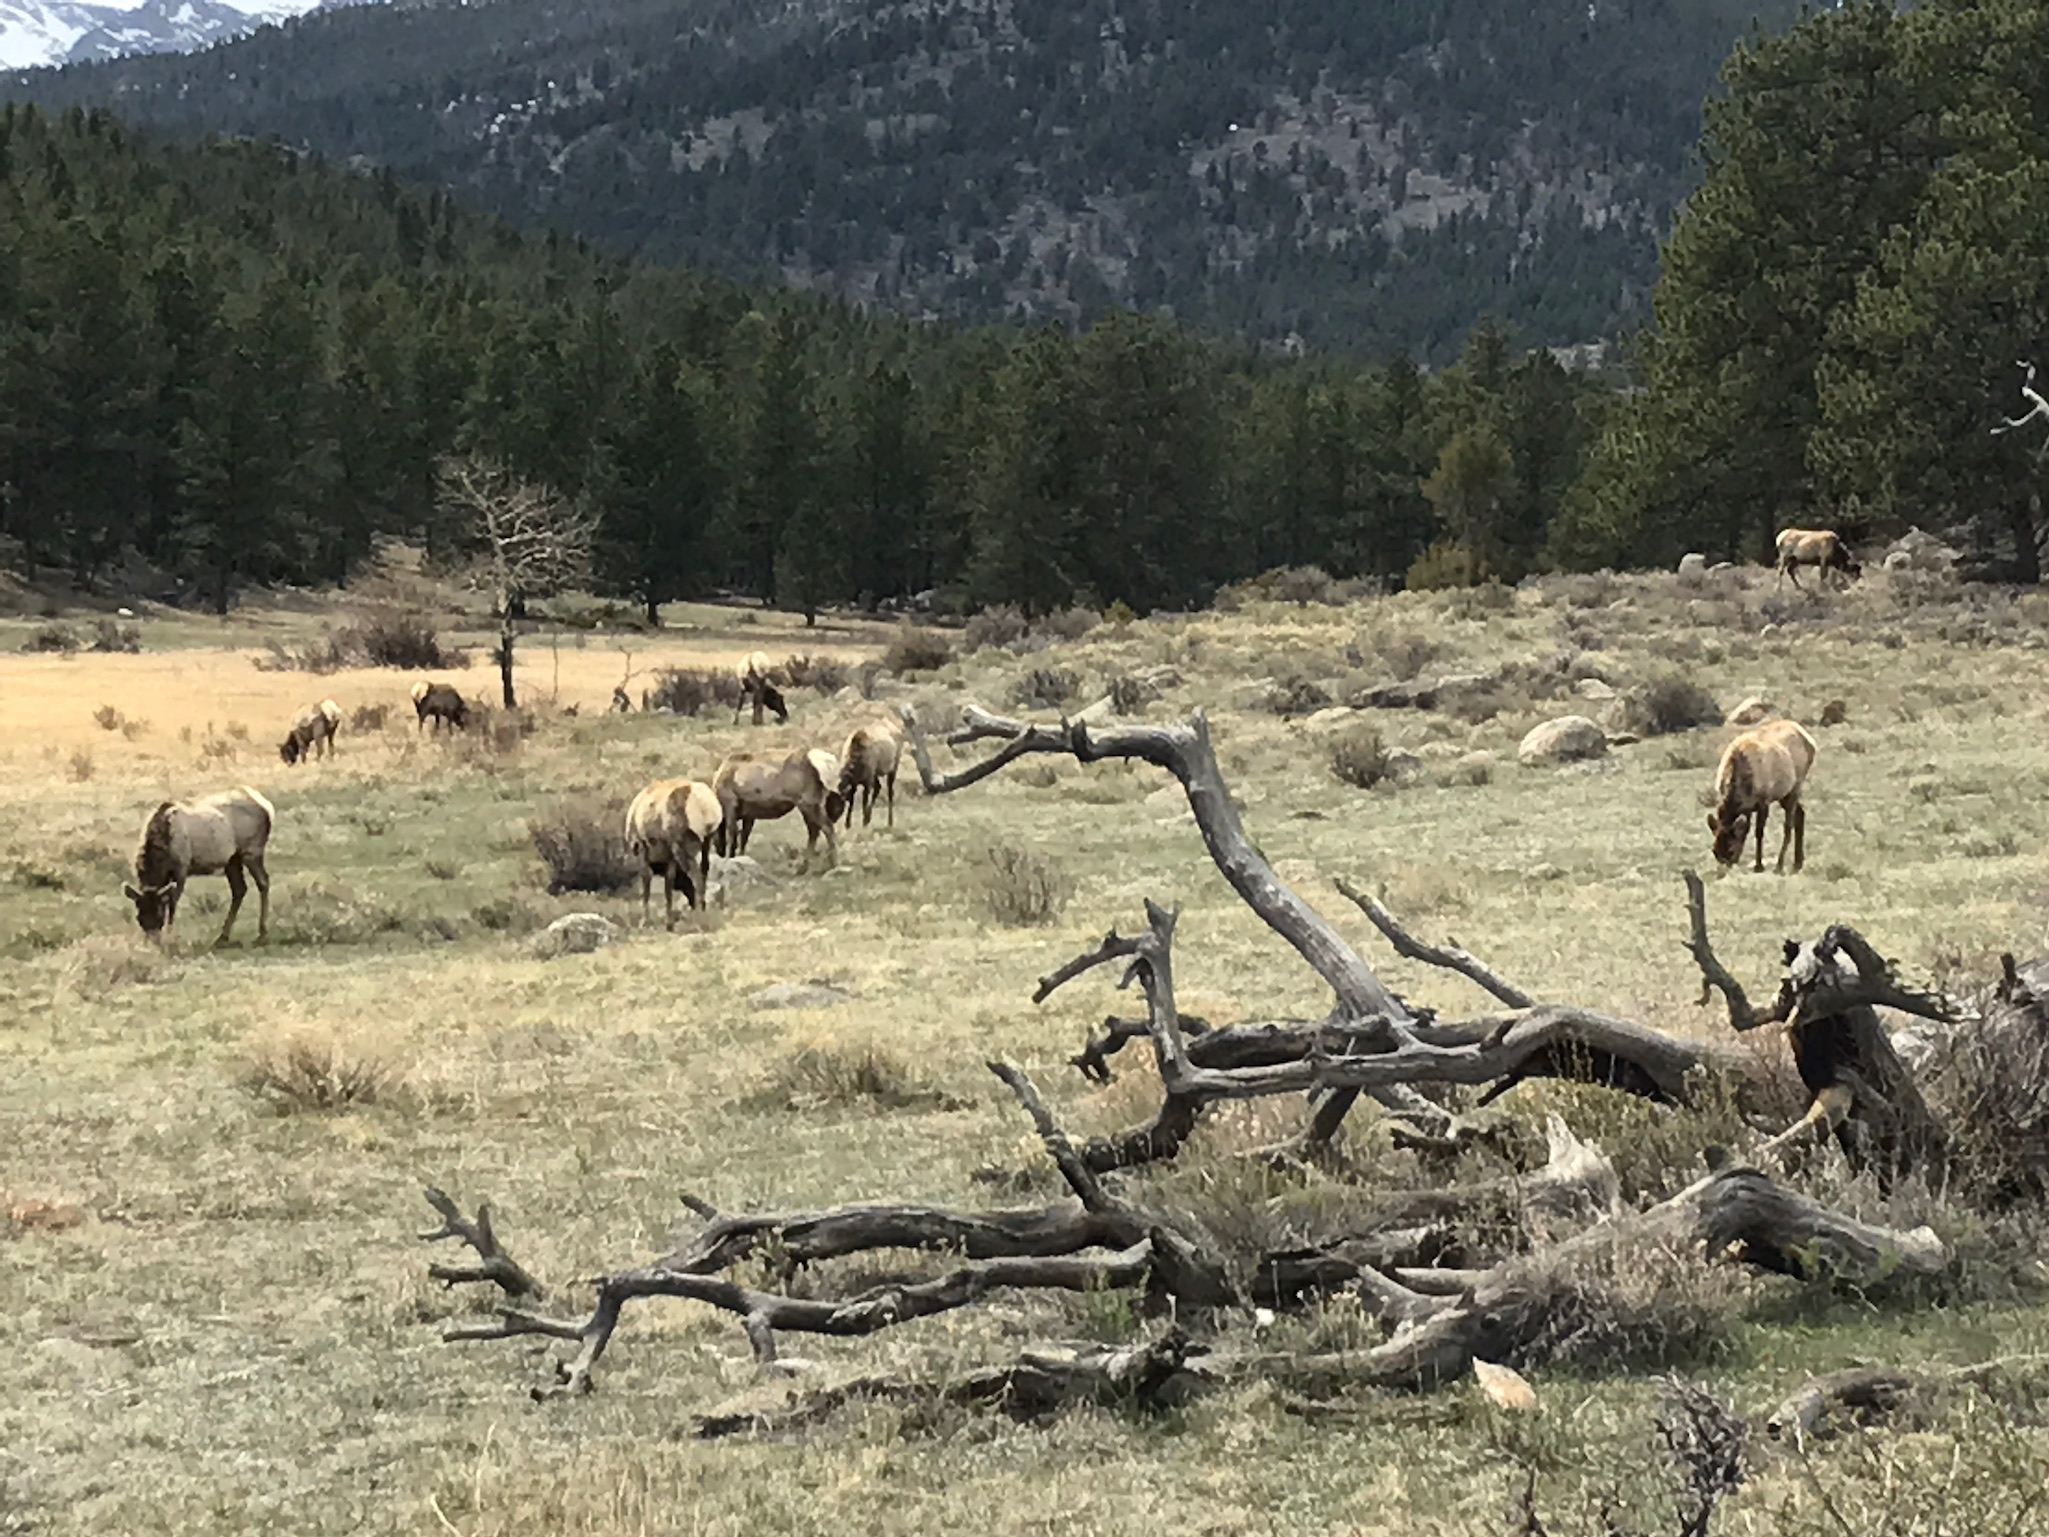 We got Kyle really excited about seeing elk, and luckily we saw plenty